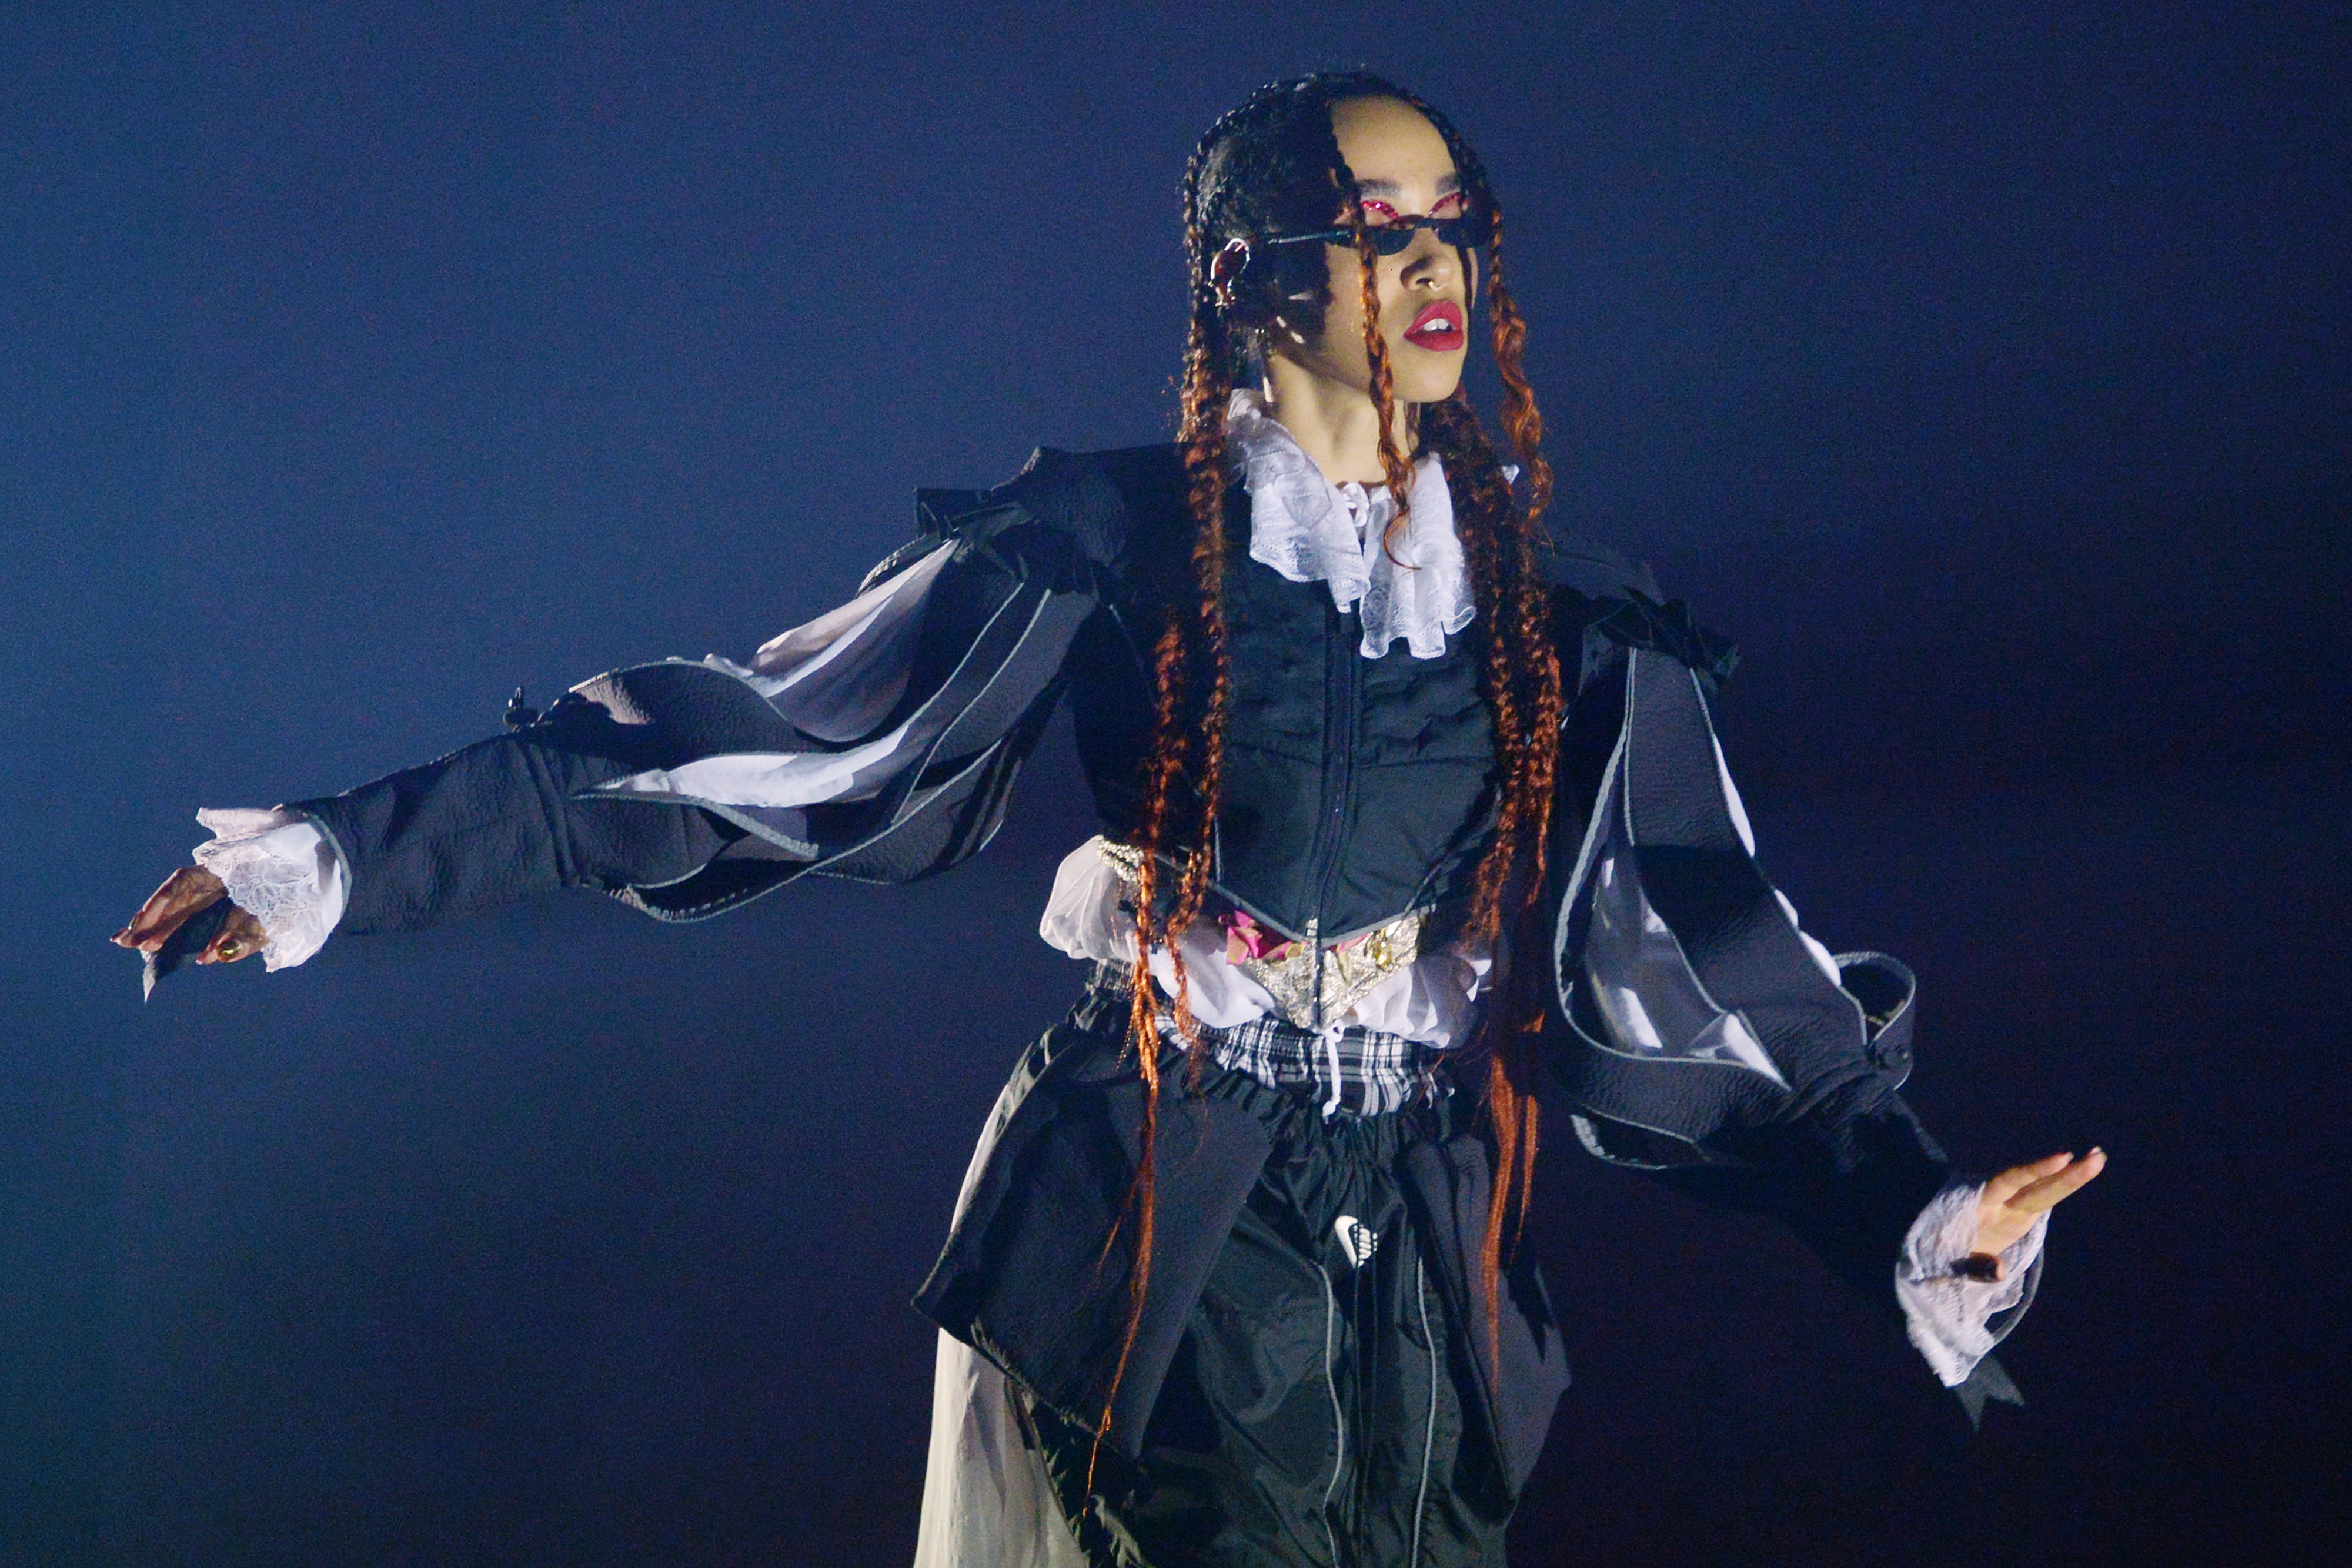 FKA Twigs Performs At Brixton Academy